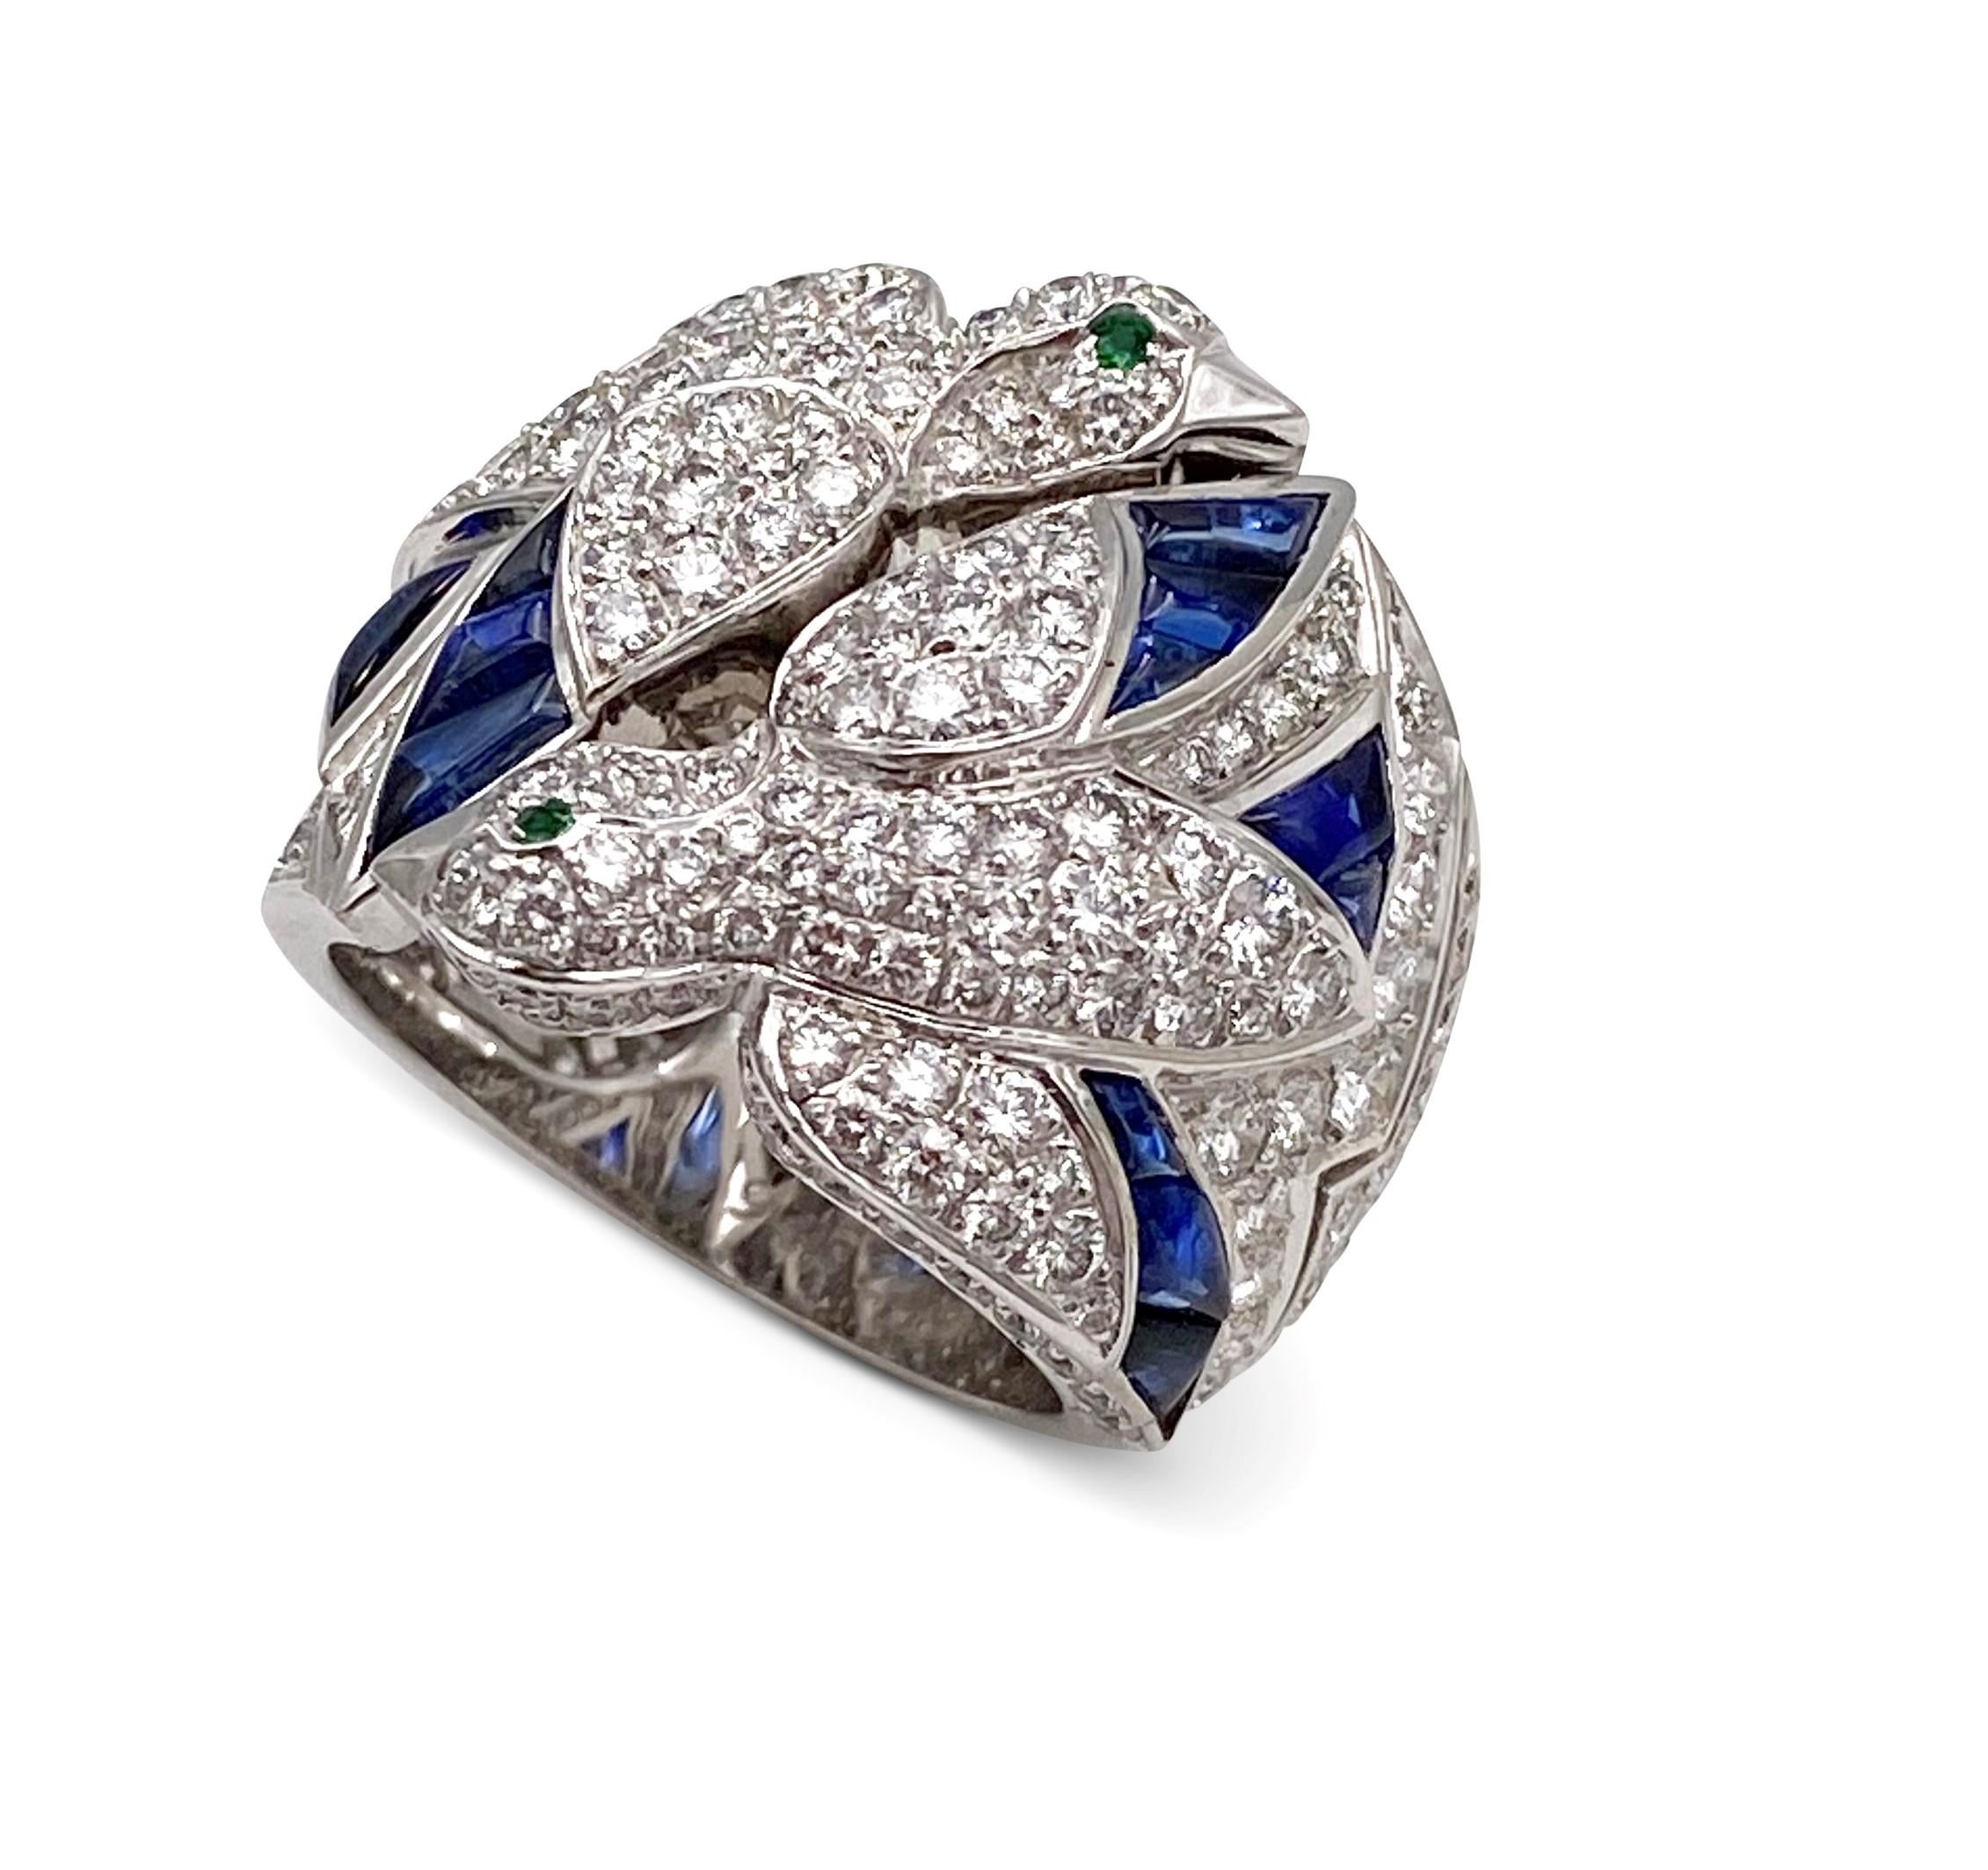 Rare Cartier 'les Oiseaux Liberes' ring centers on two doves taking flight adorned with an estimated 5.50 carats of pave set round brilliant cut diamonds (E-F color, VS clarity) and carved cabochon sapphires. The dove eyes are bezel set with emerald